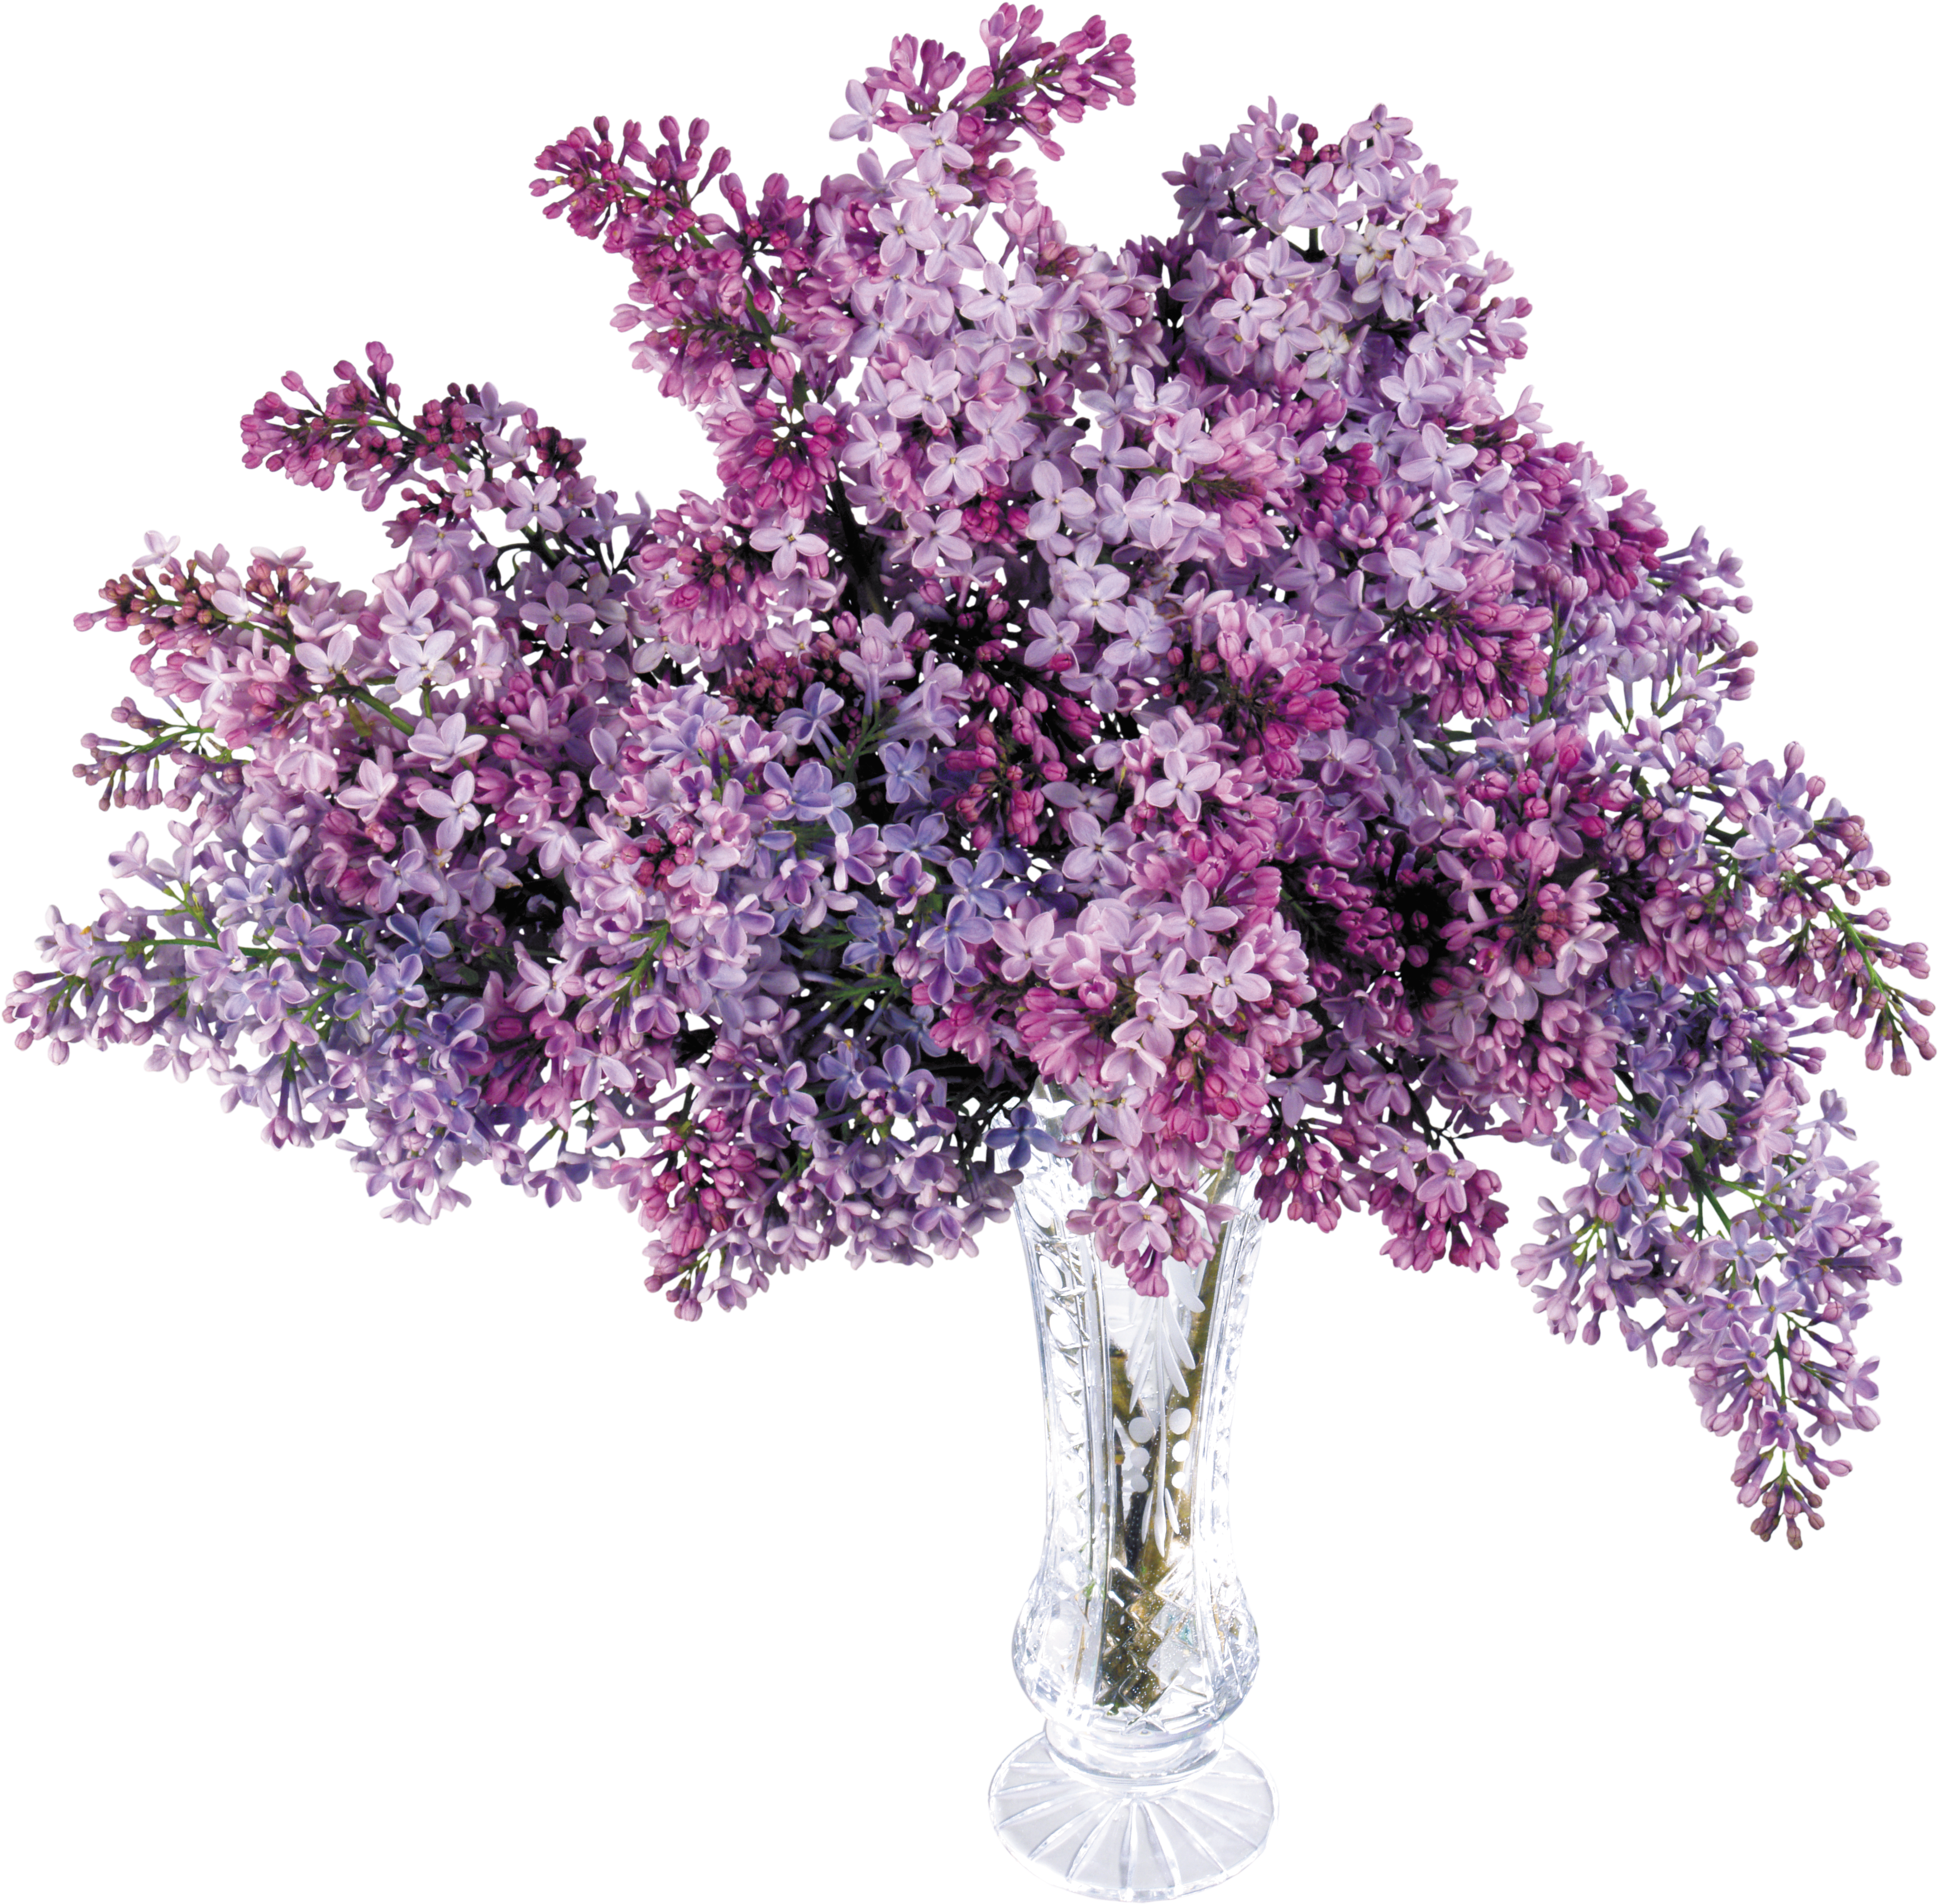 A Vase With Purple Flowers